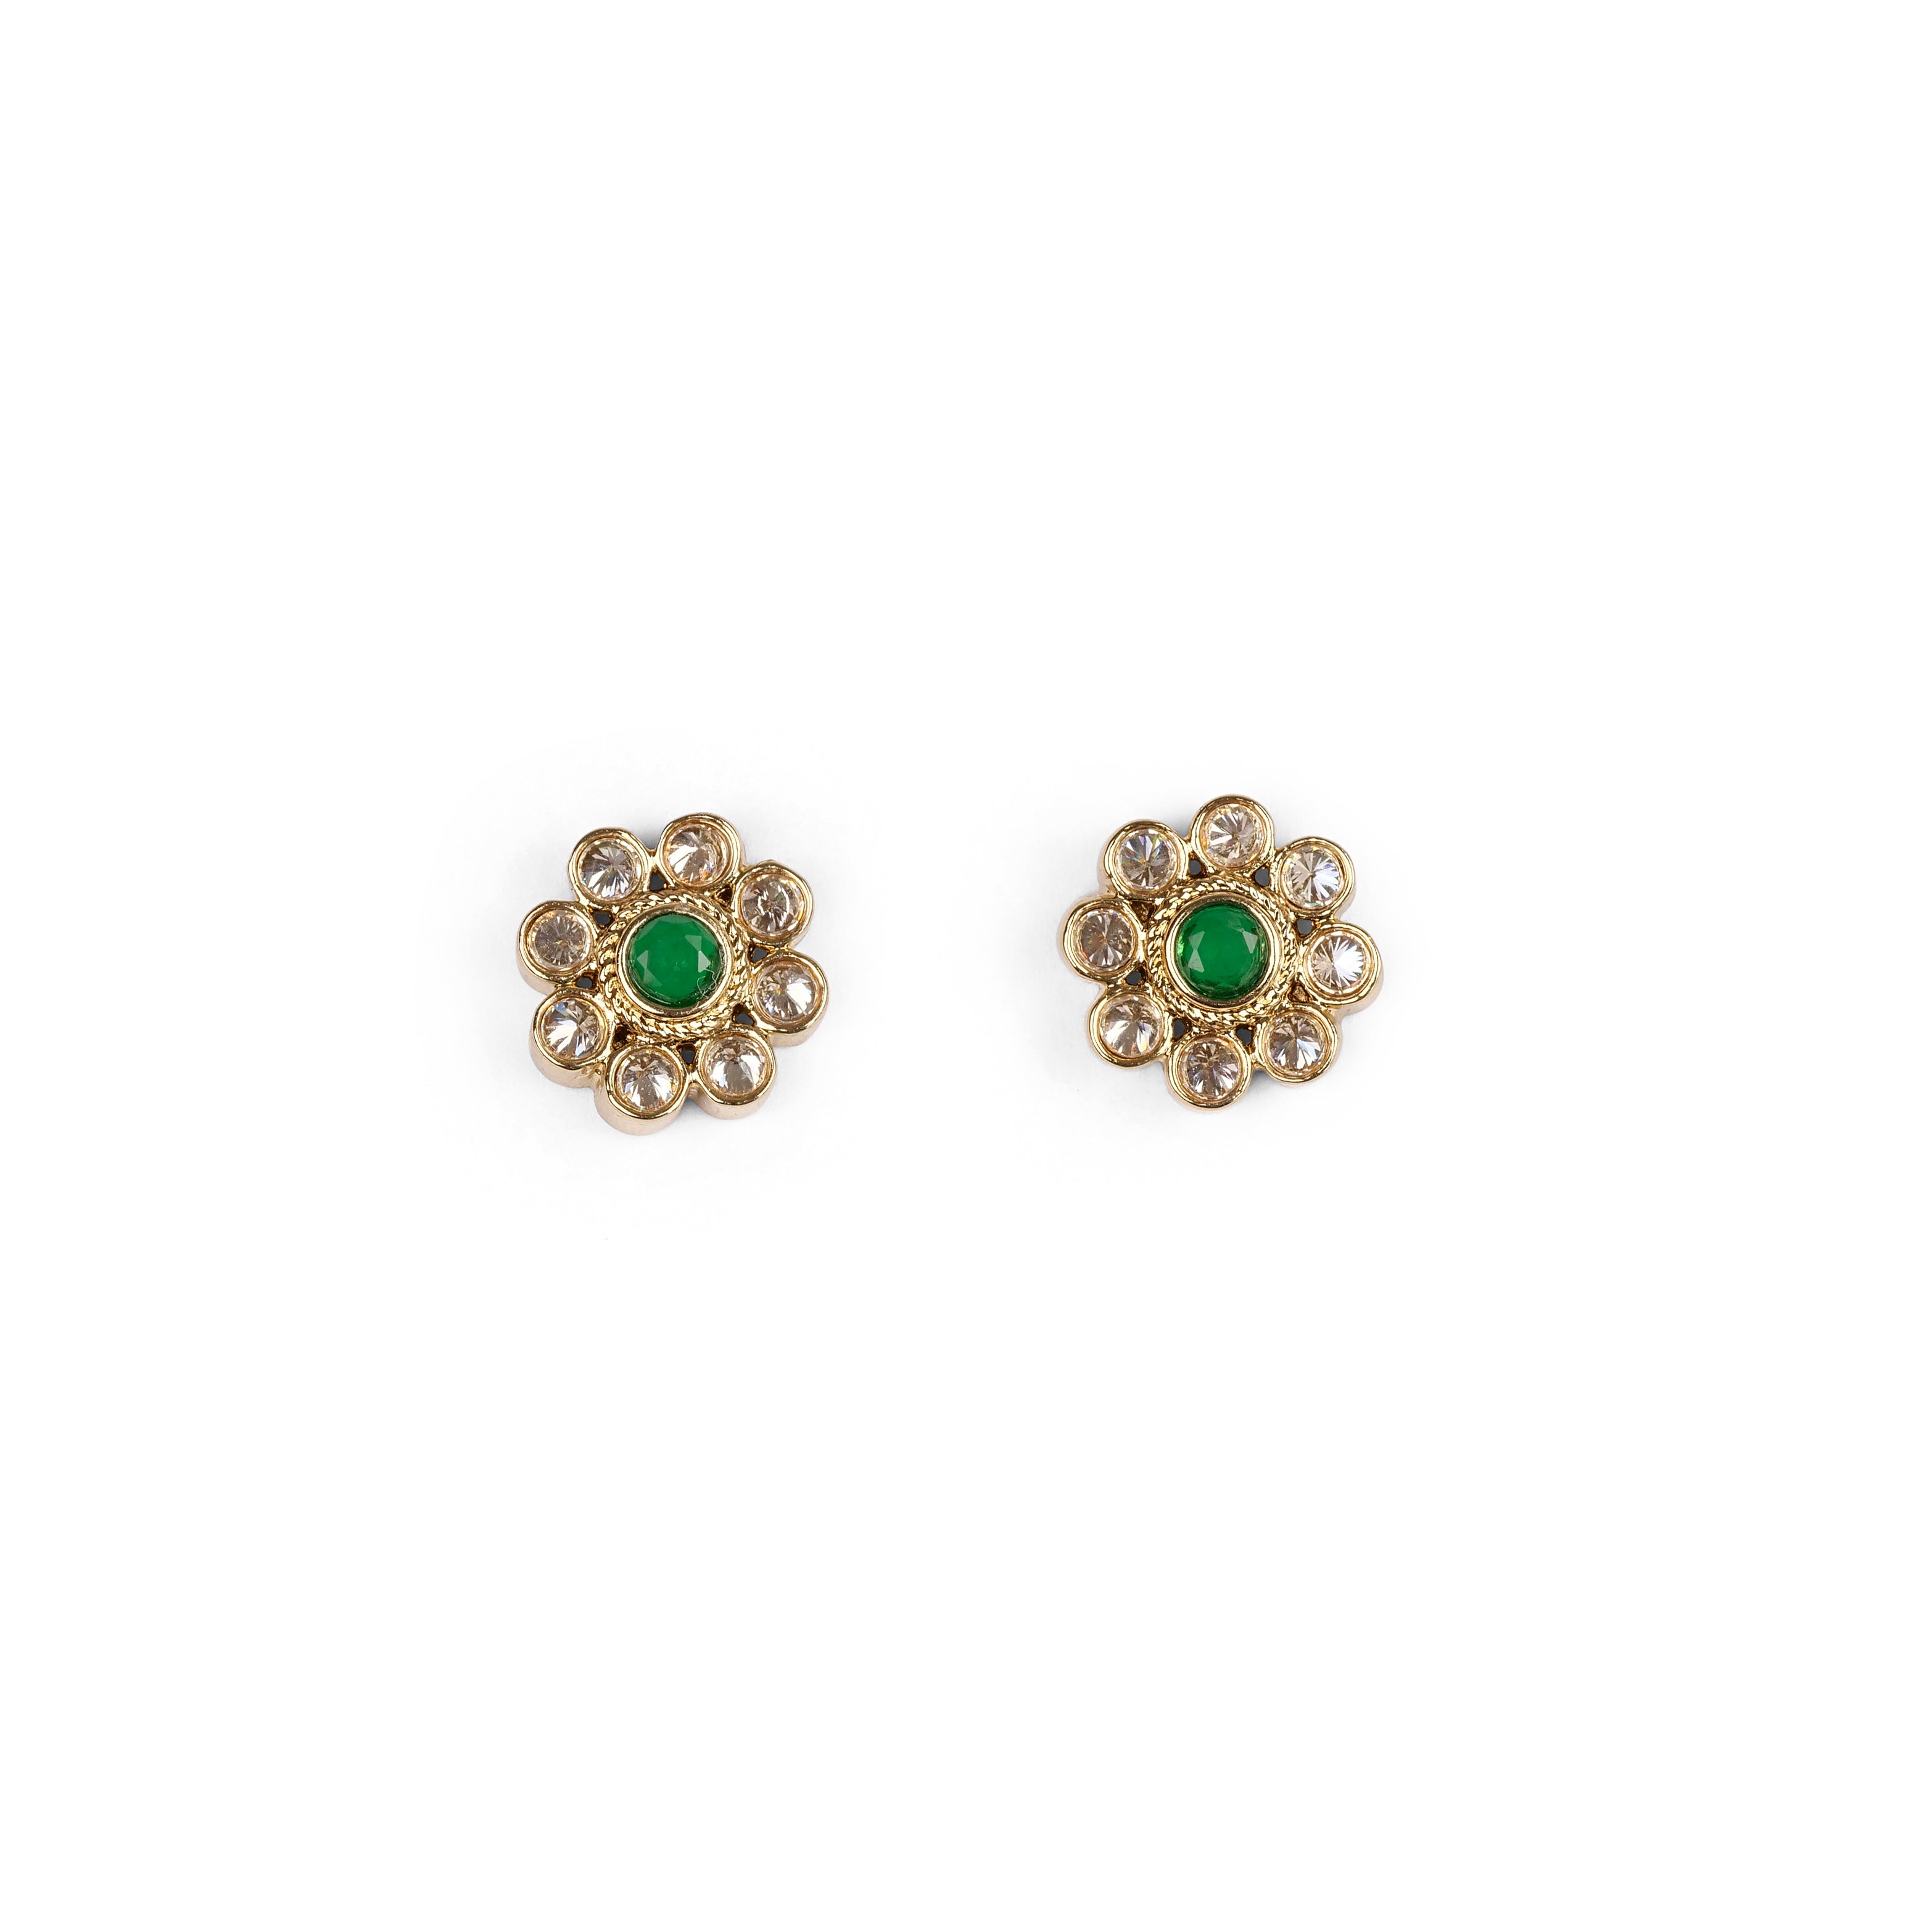 Frida Floral Earstuds in Green